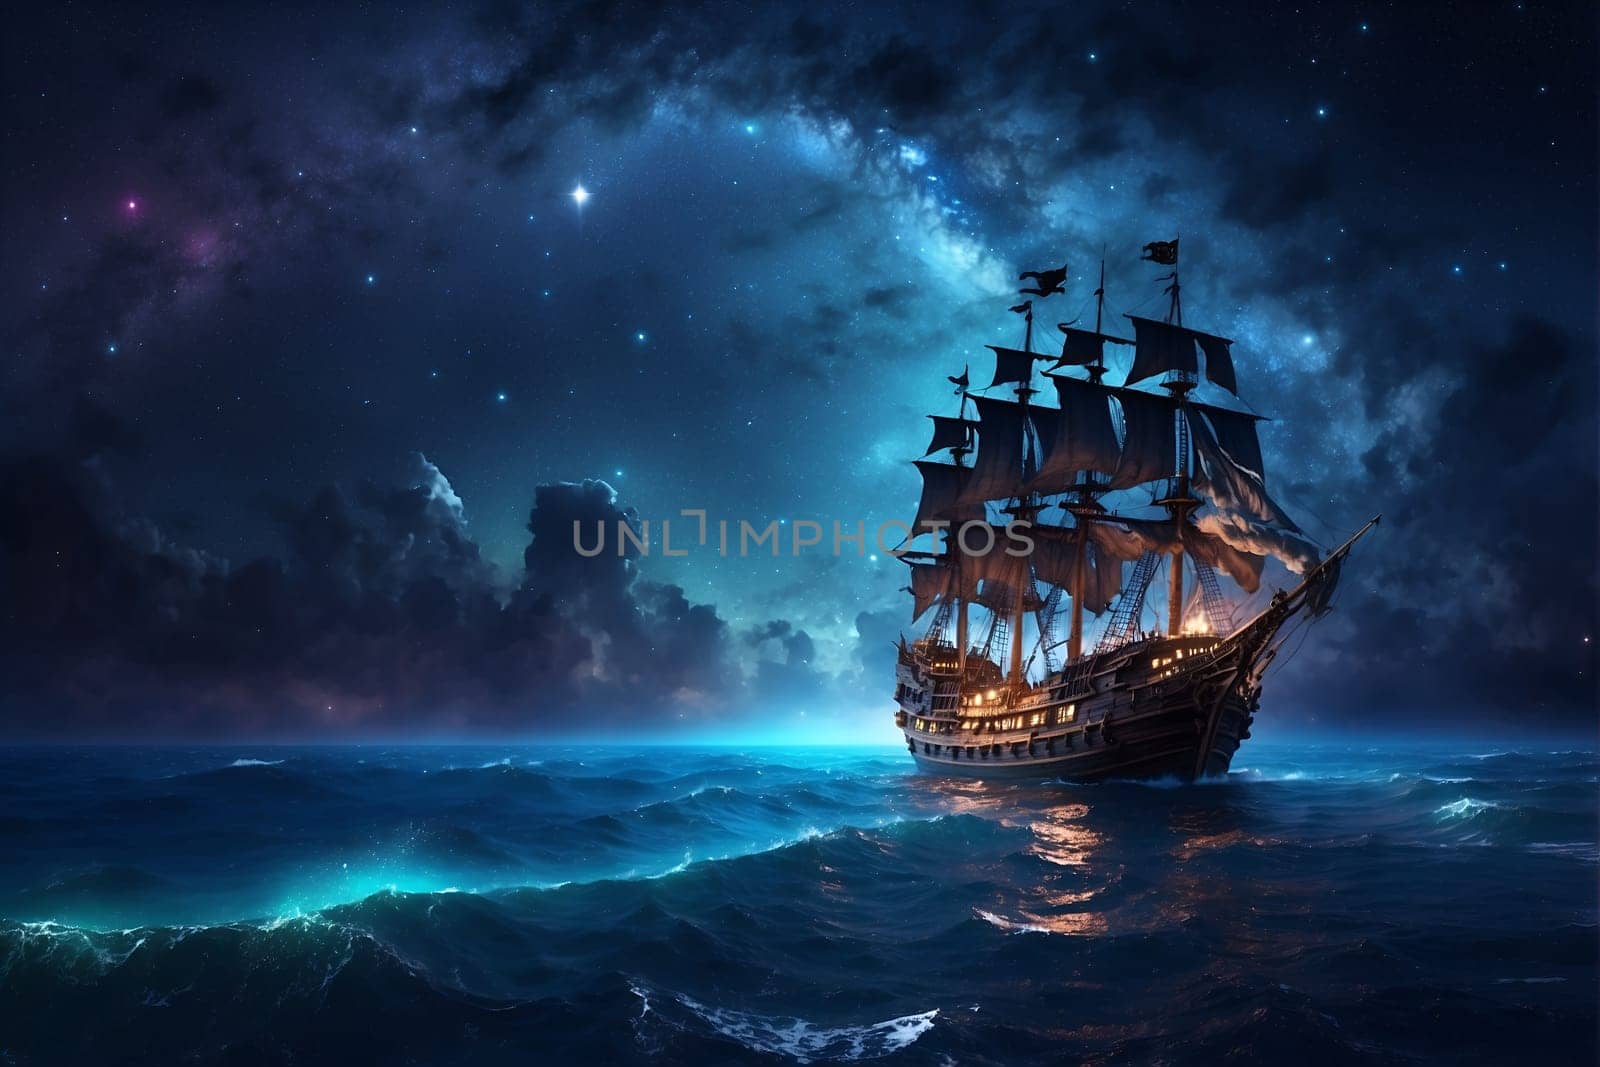 A pirate ship sails through the dark waves of the ocean under the night sky.